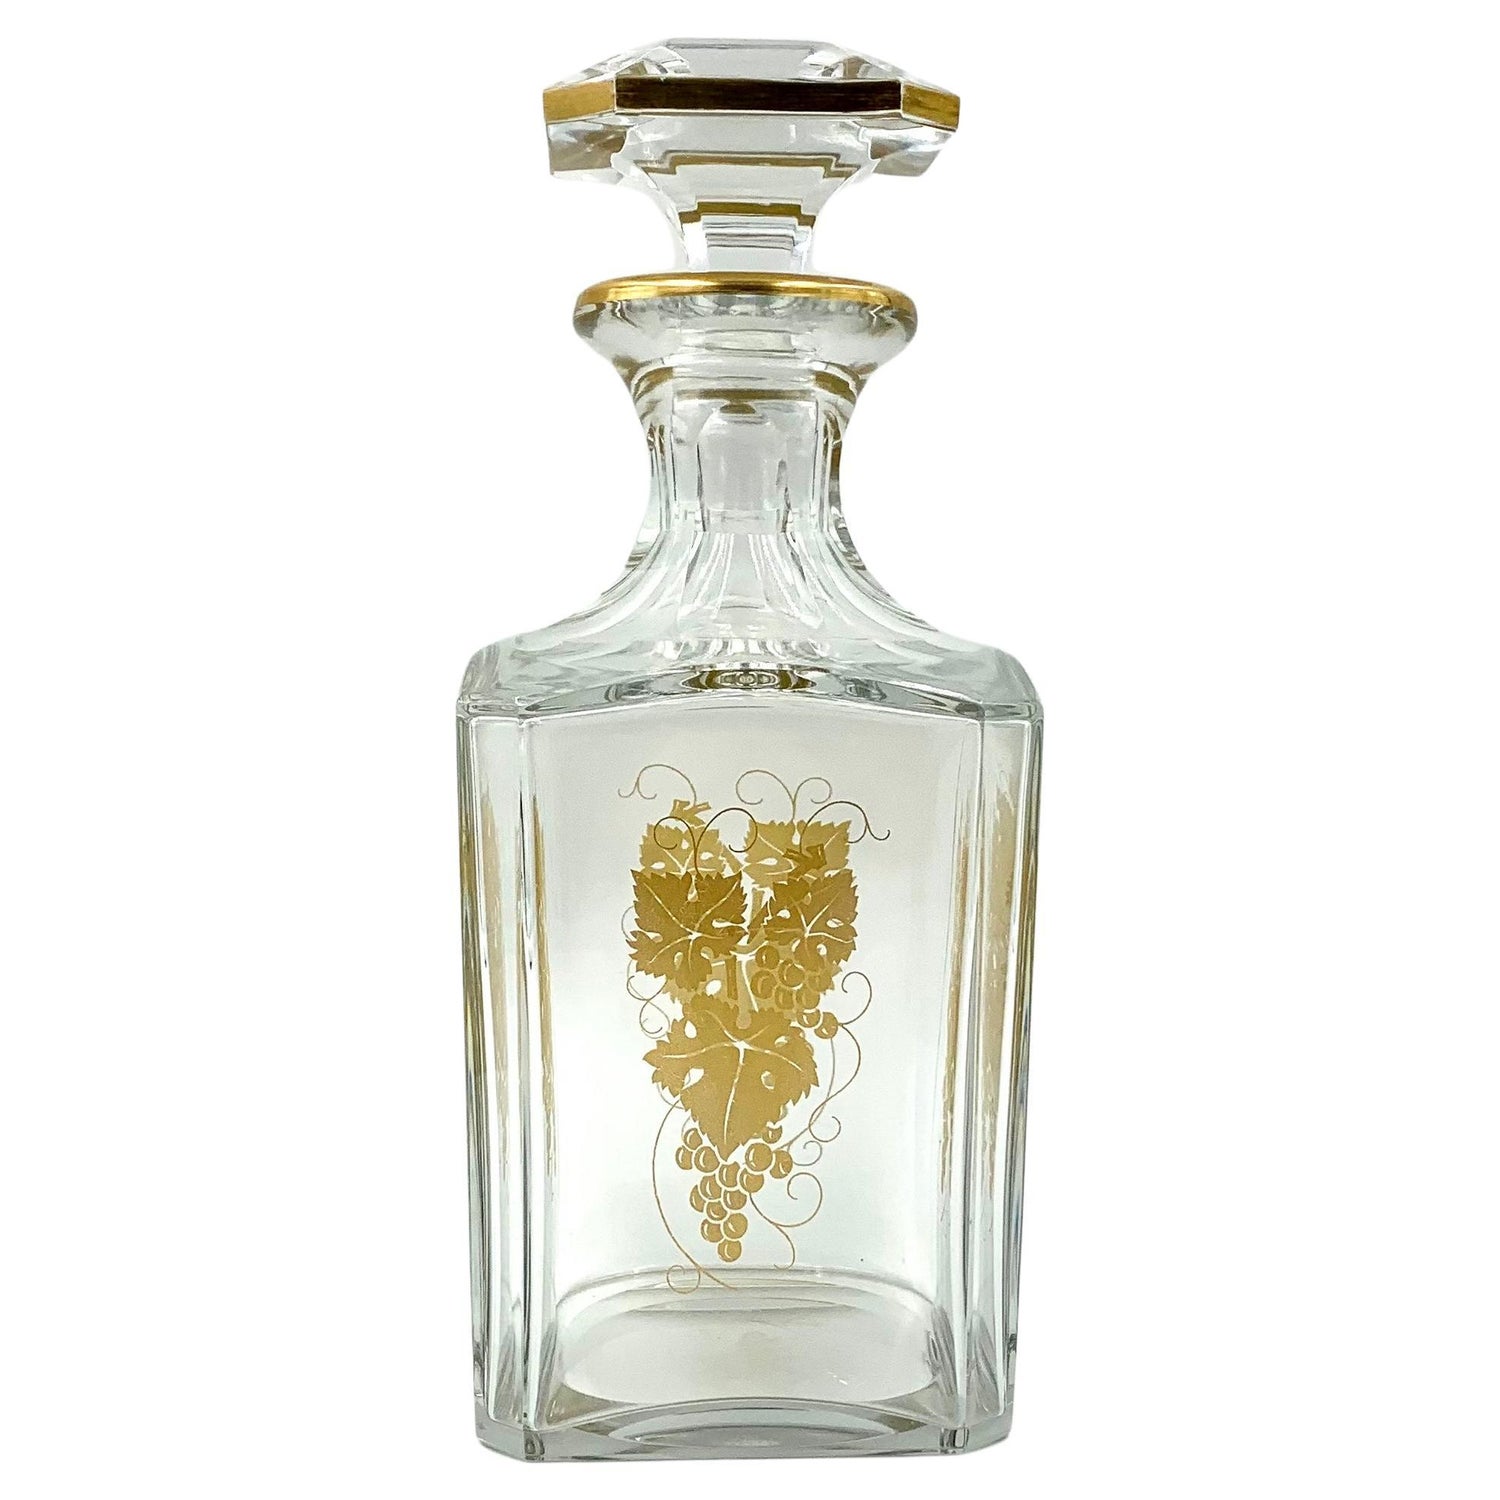 https://a.1stdibscdn.com/rare-edition-baccarat-empire-harcourt-gilded-grape-motif-whiskey-decanter-for-sale/f_58282/f_283926521650948875772/f_28392652_1650948876430_bg_processed.jpg?width=1500